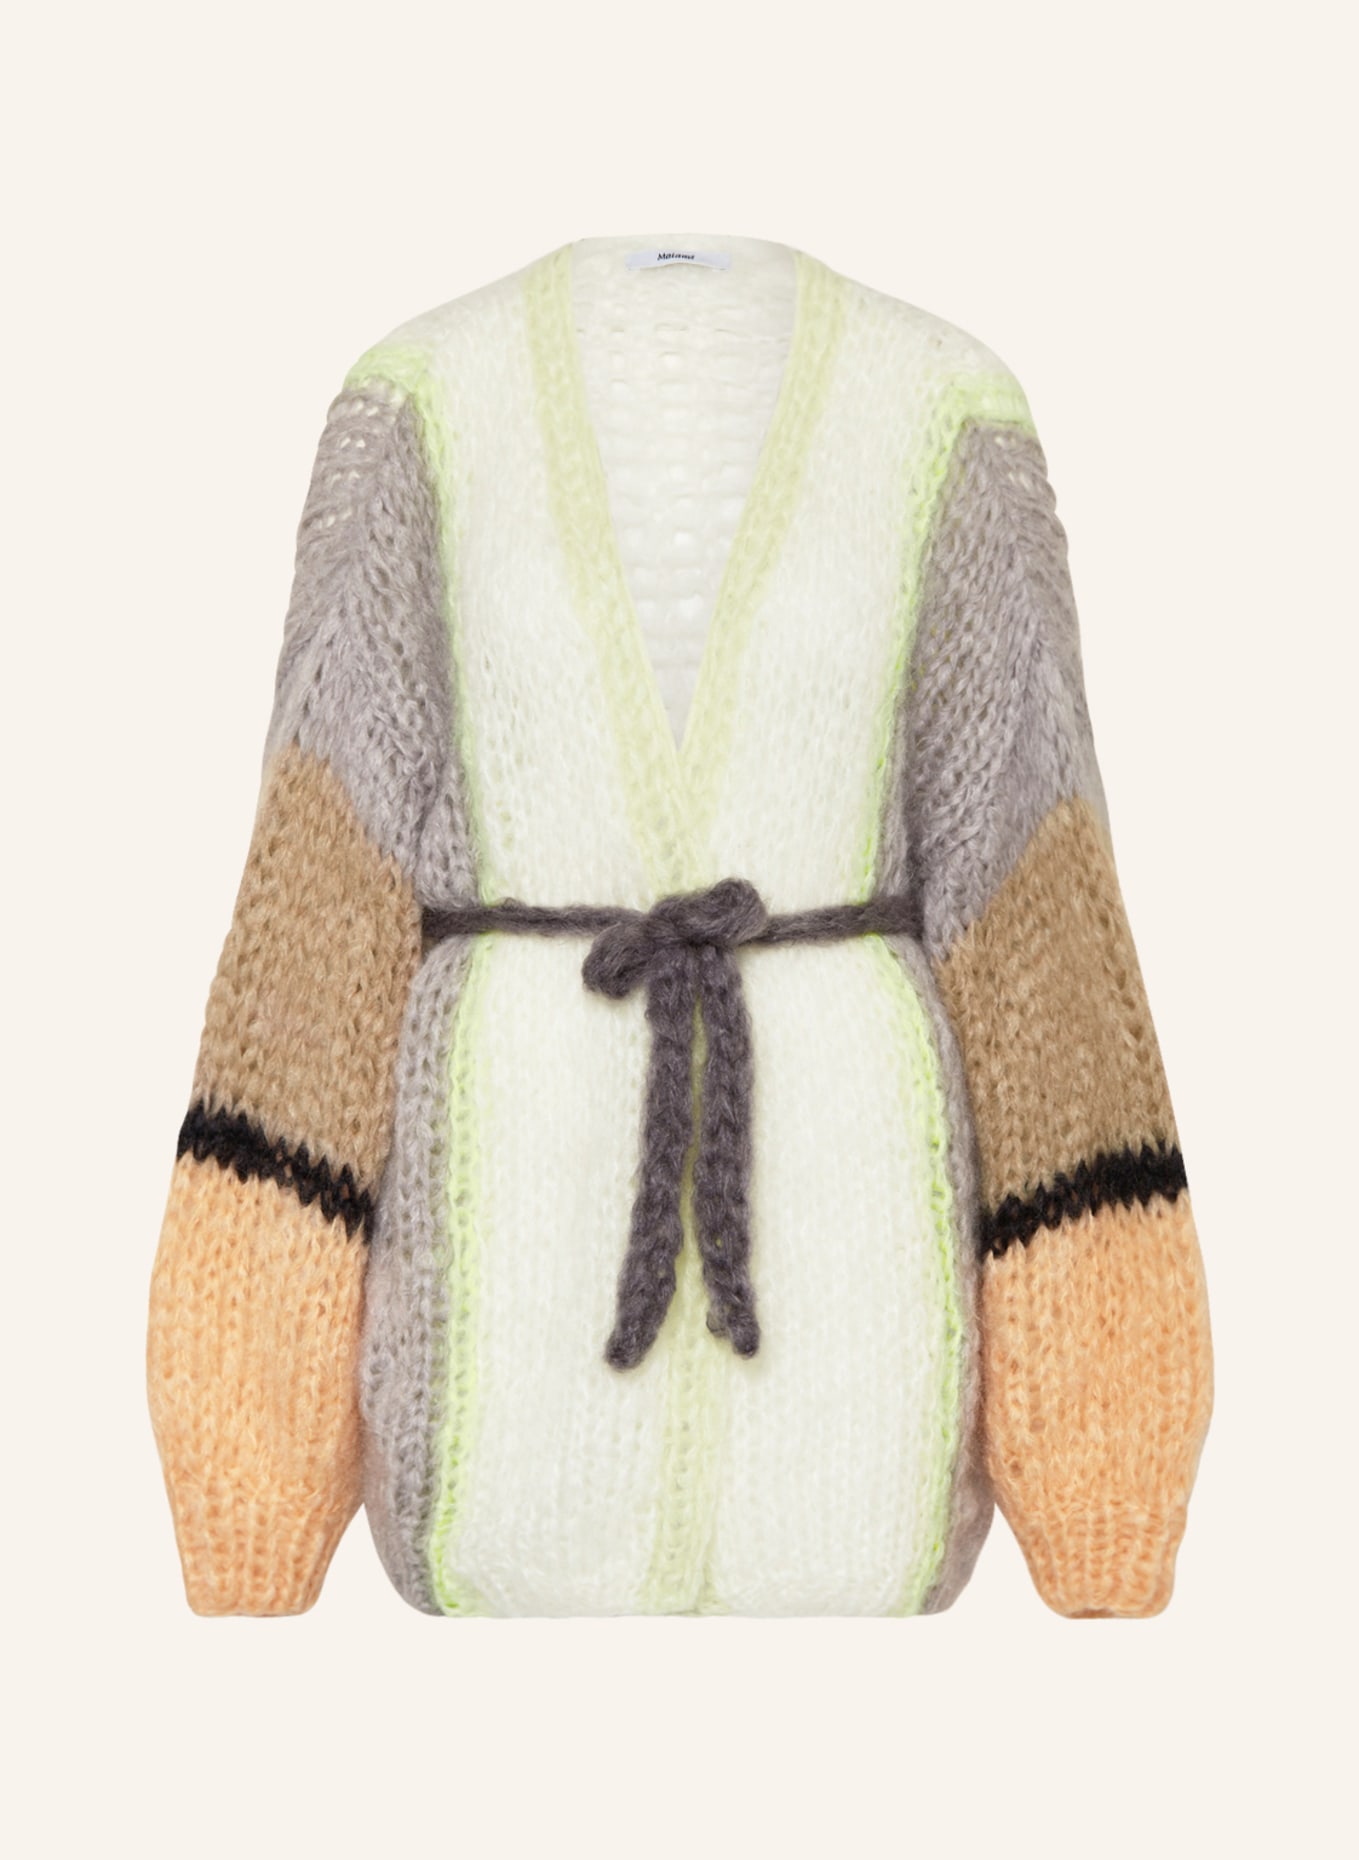 MAIAMI Knit cardigan made of mohair, Color: TAUPE/ WHITE/ NEON YELLOW (Image 1)